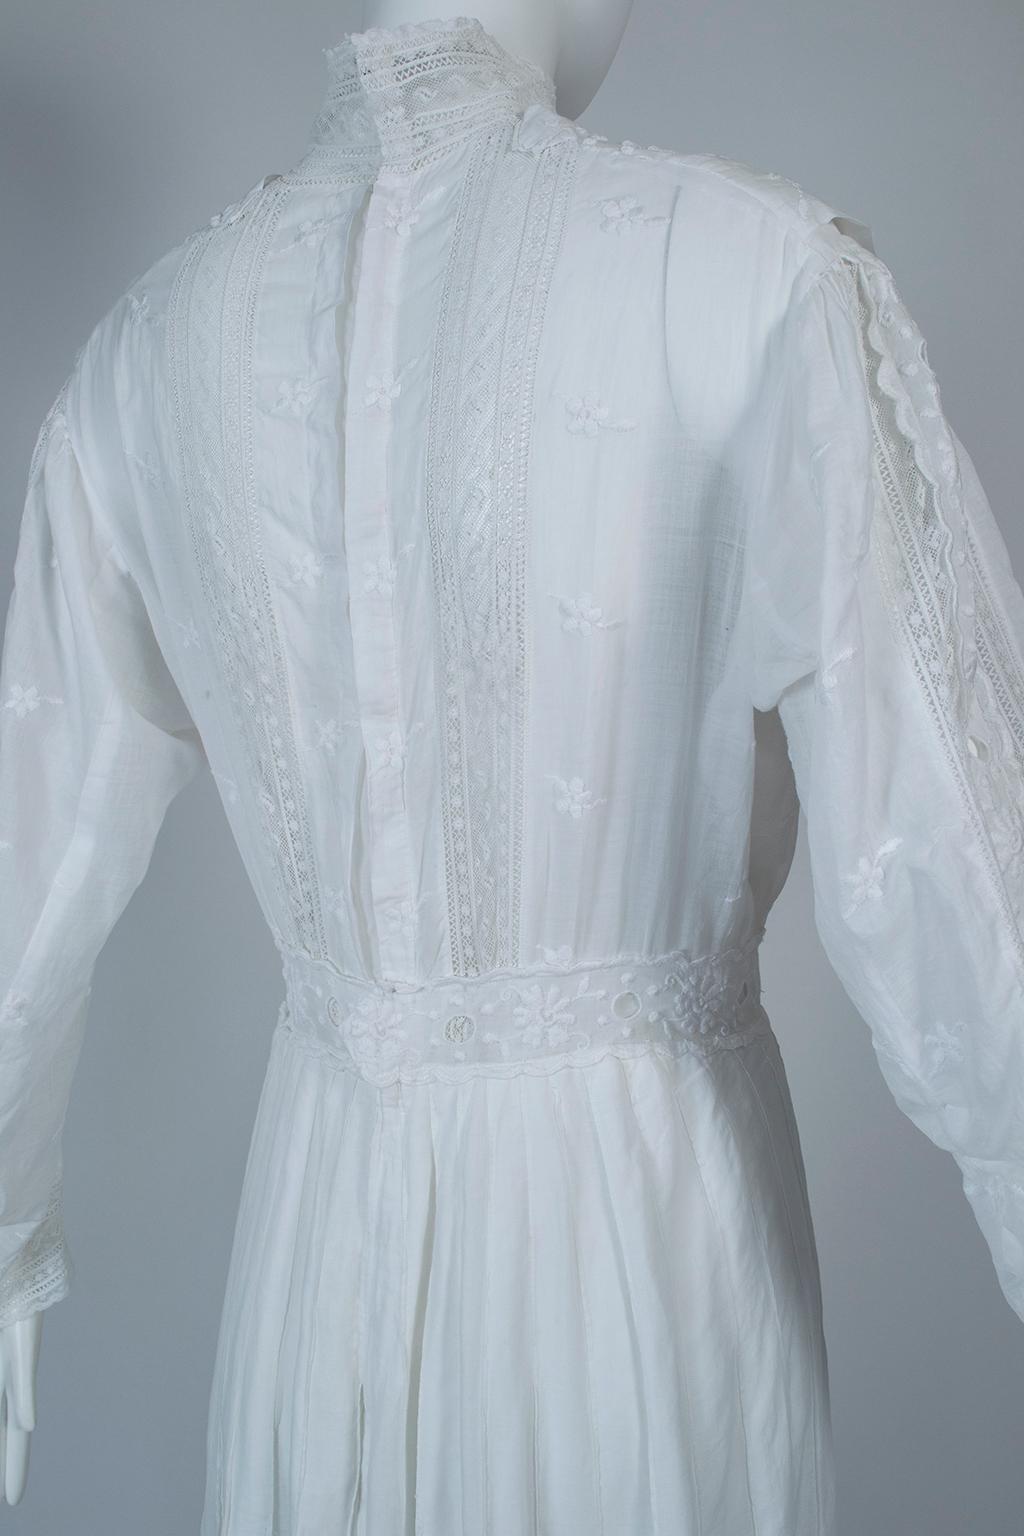 Victorian White Eyelet and Lace Shoulder Pleat Afternoon Tea Dress - M, 1880s In Good Condition In Tucson, AZ